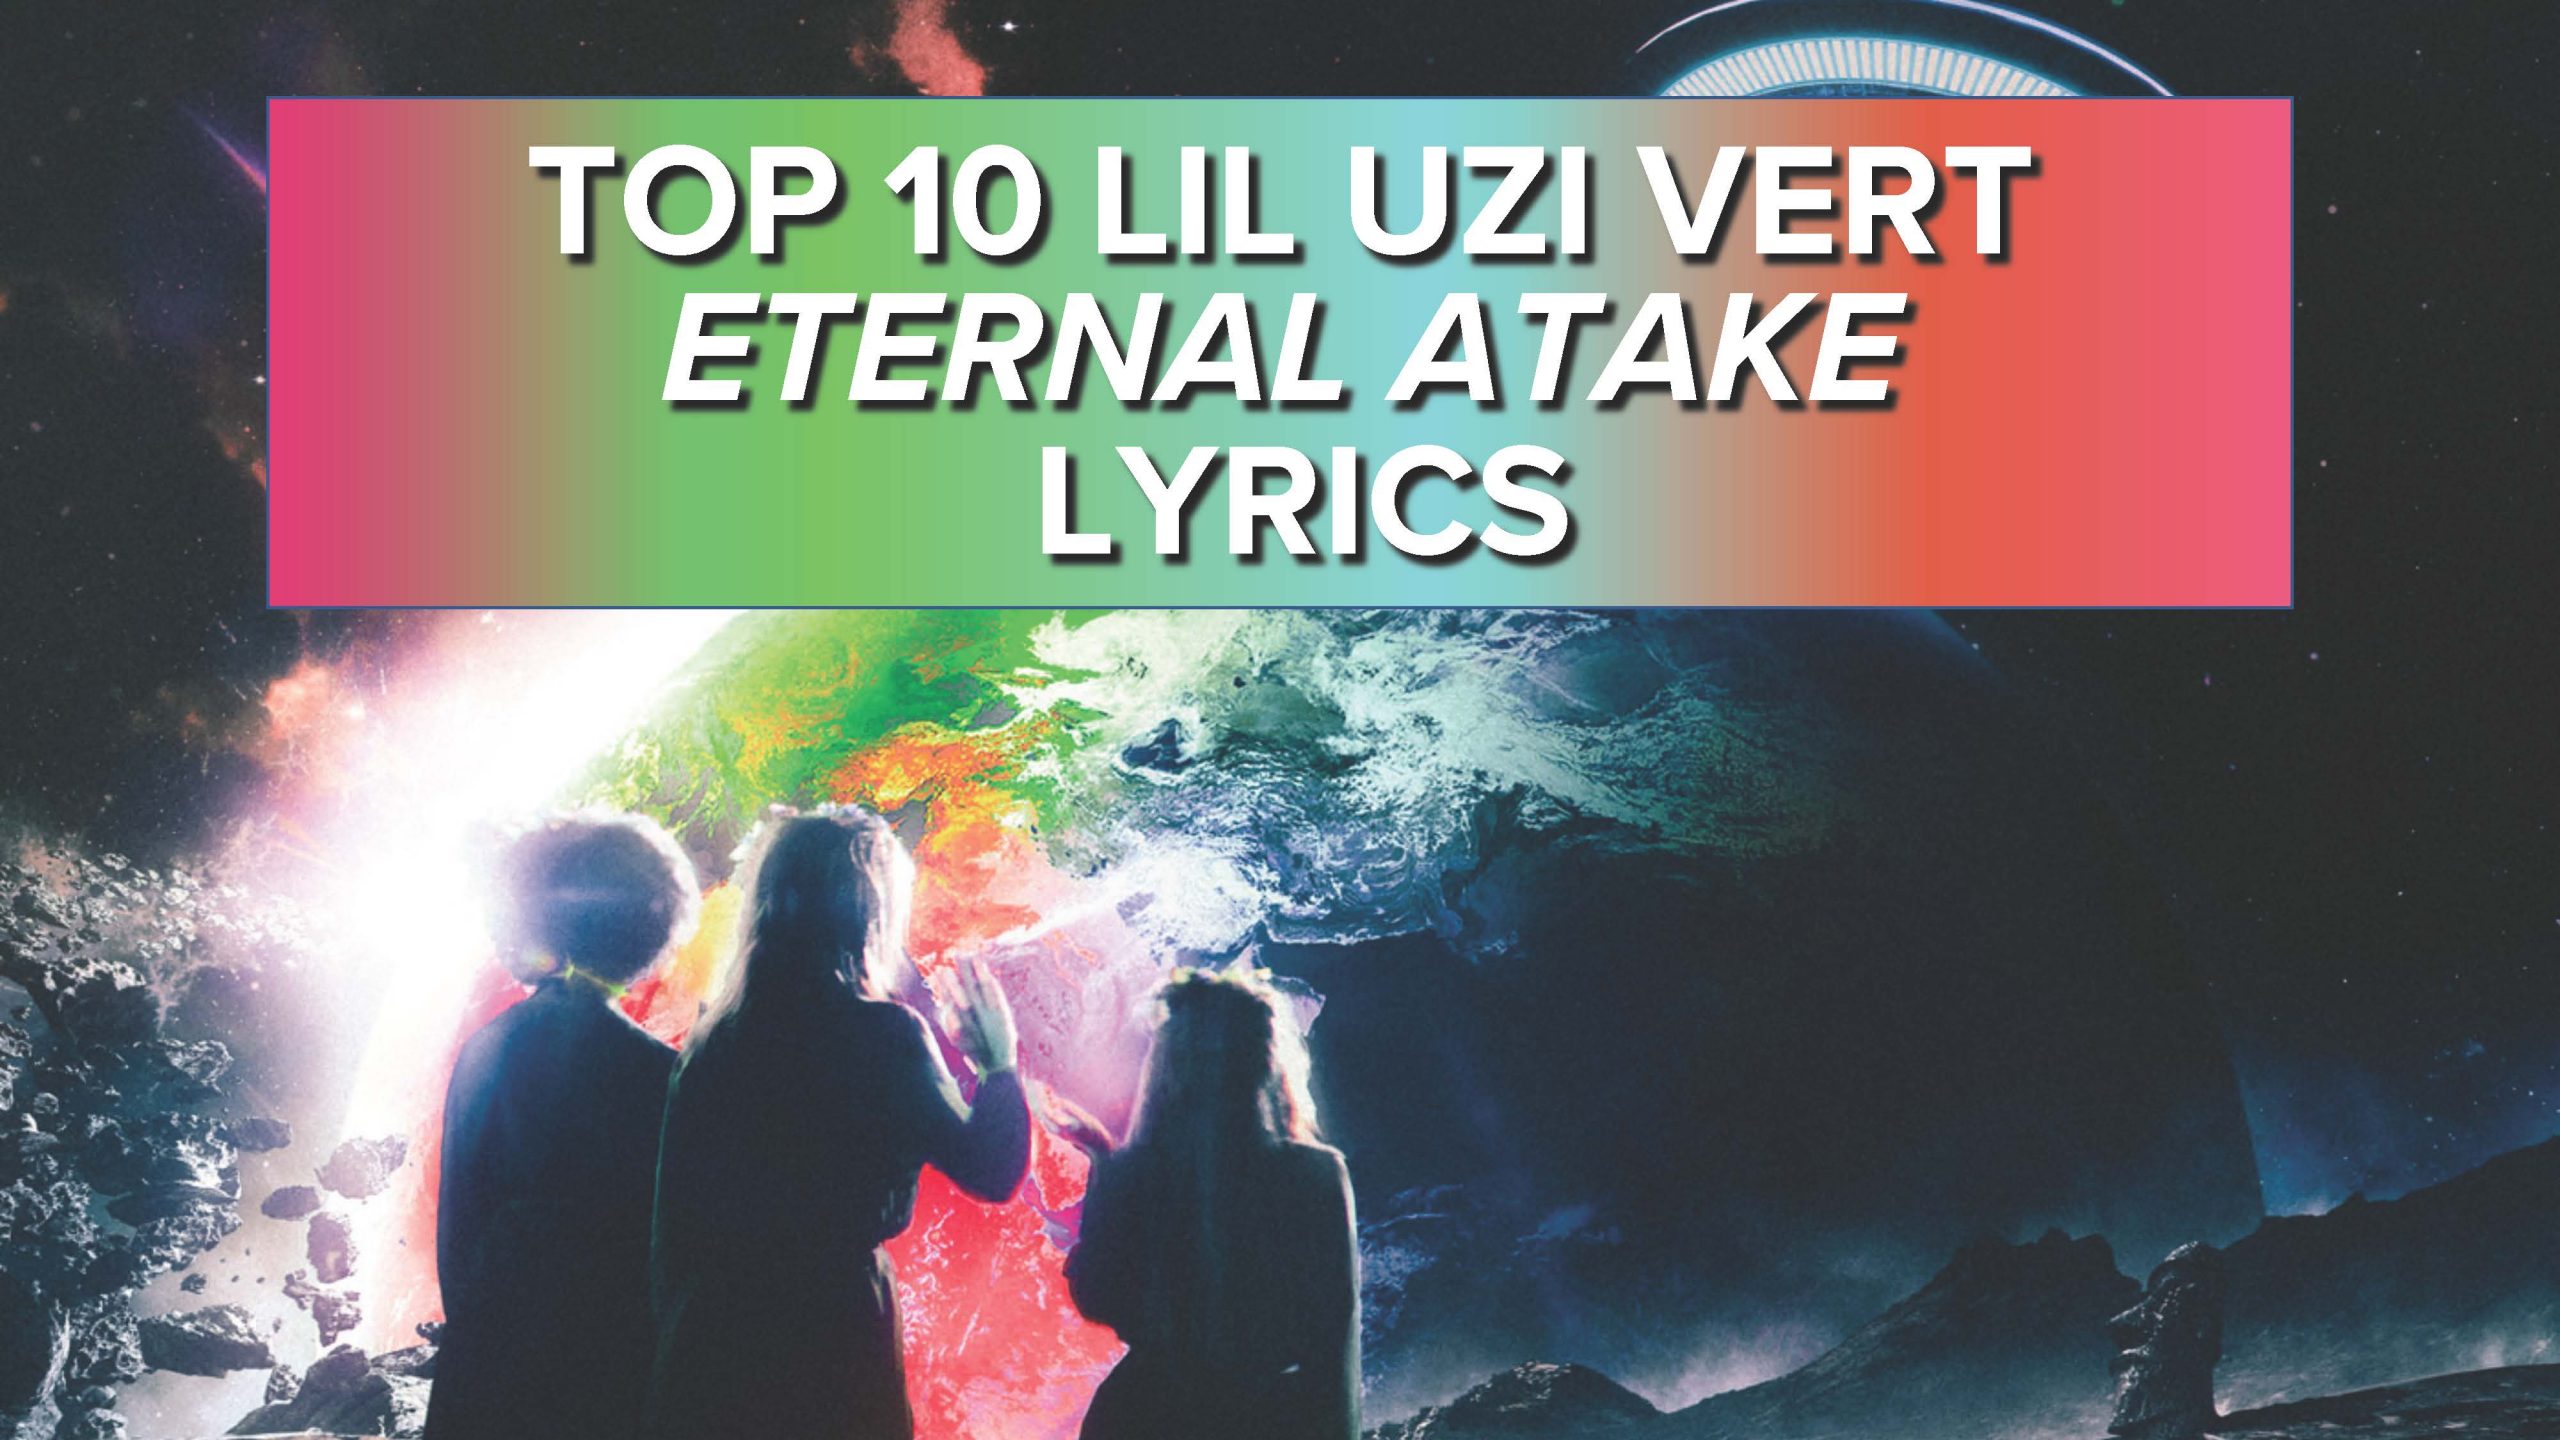 Top 10 Lil Uzi Vert Quotes From “Eternal Atake”